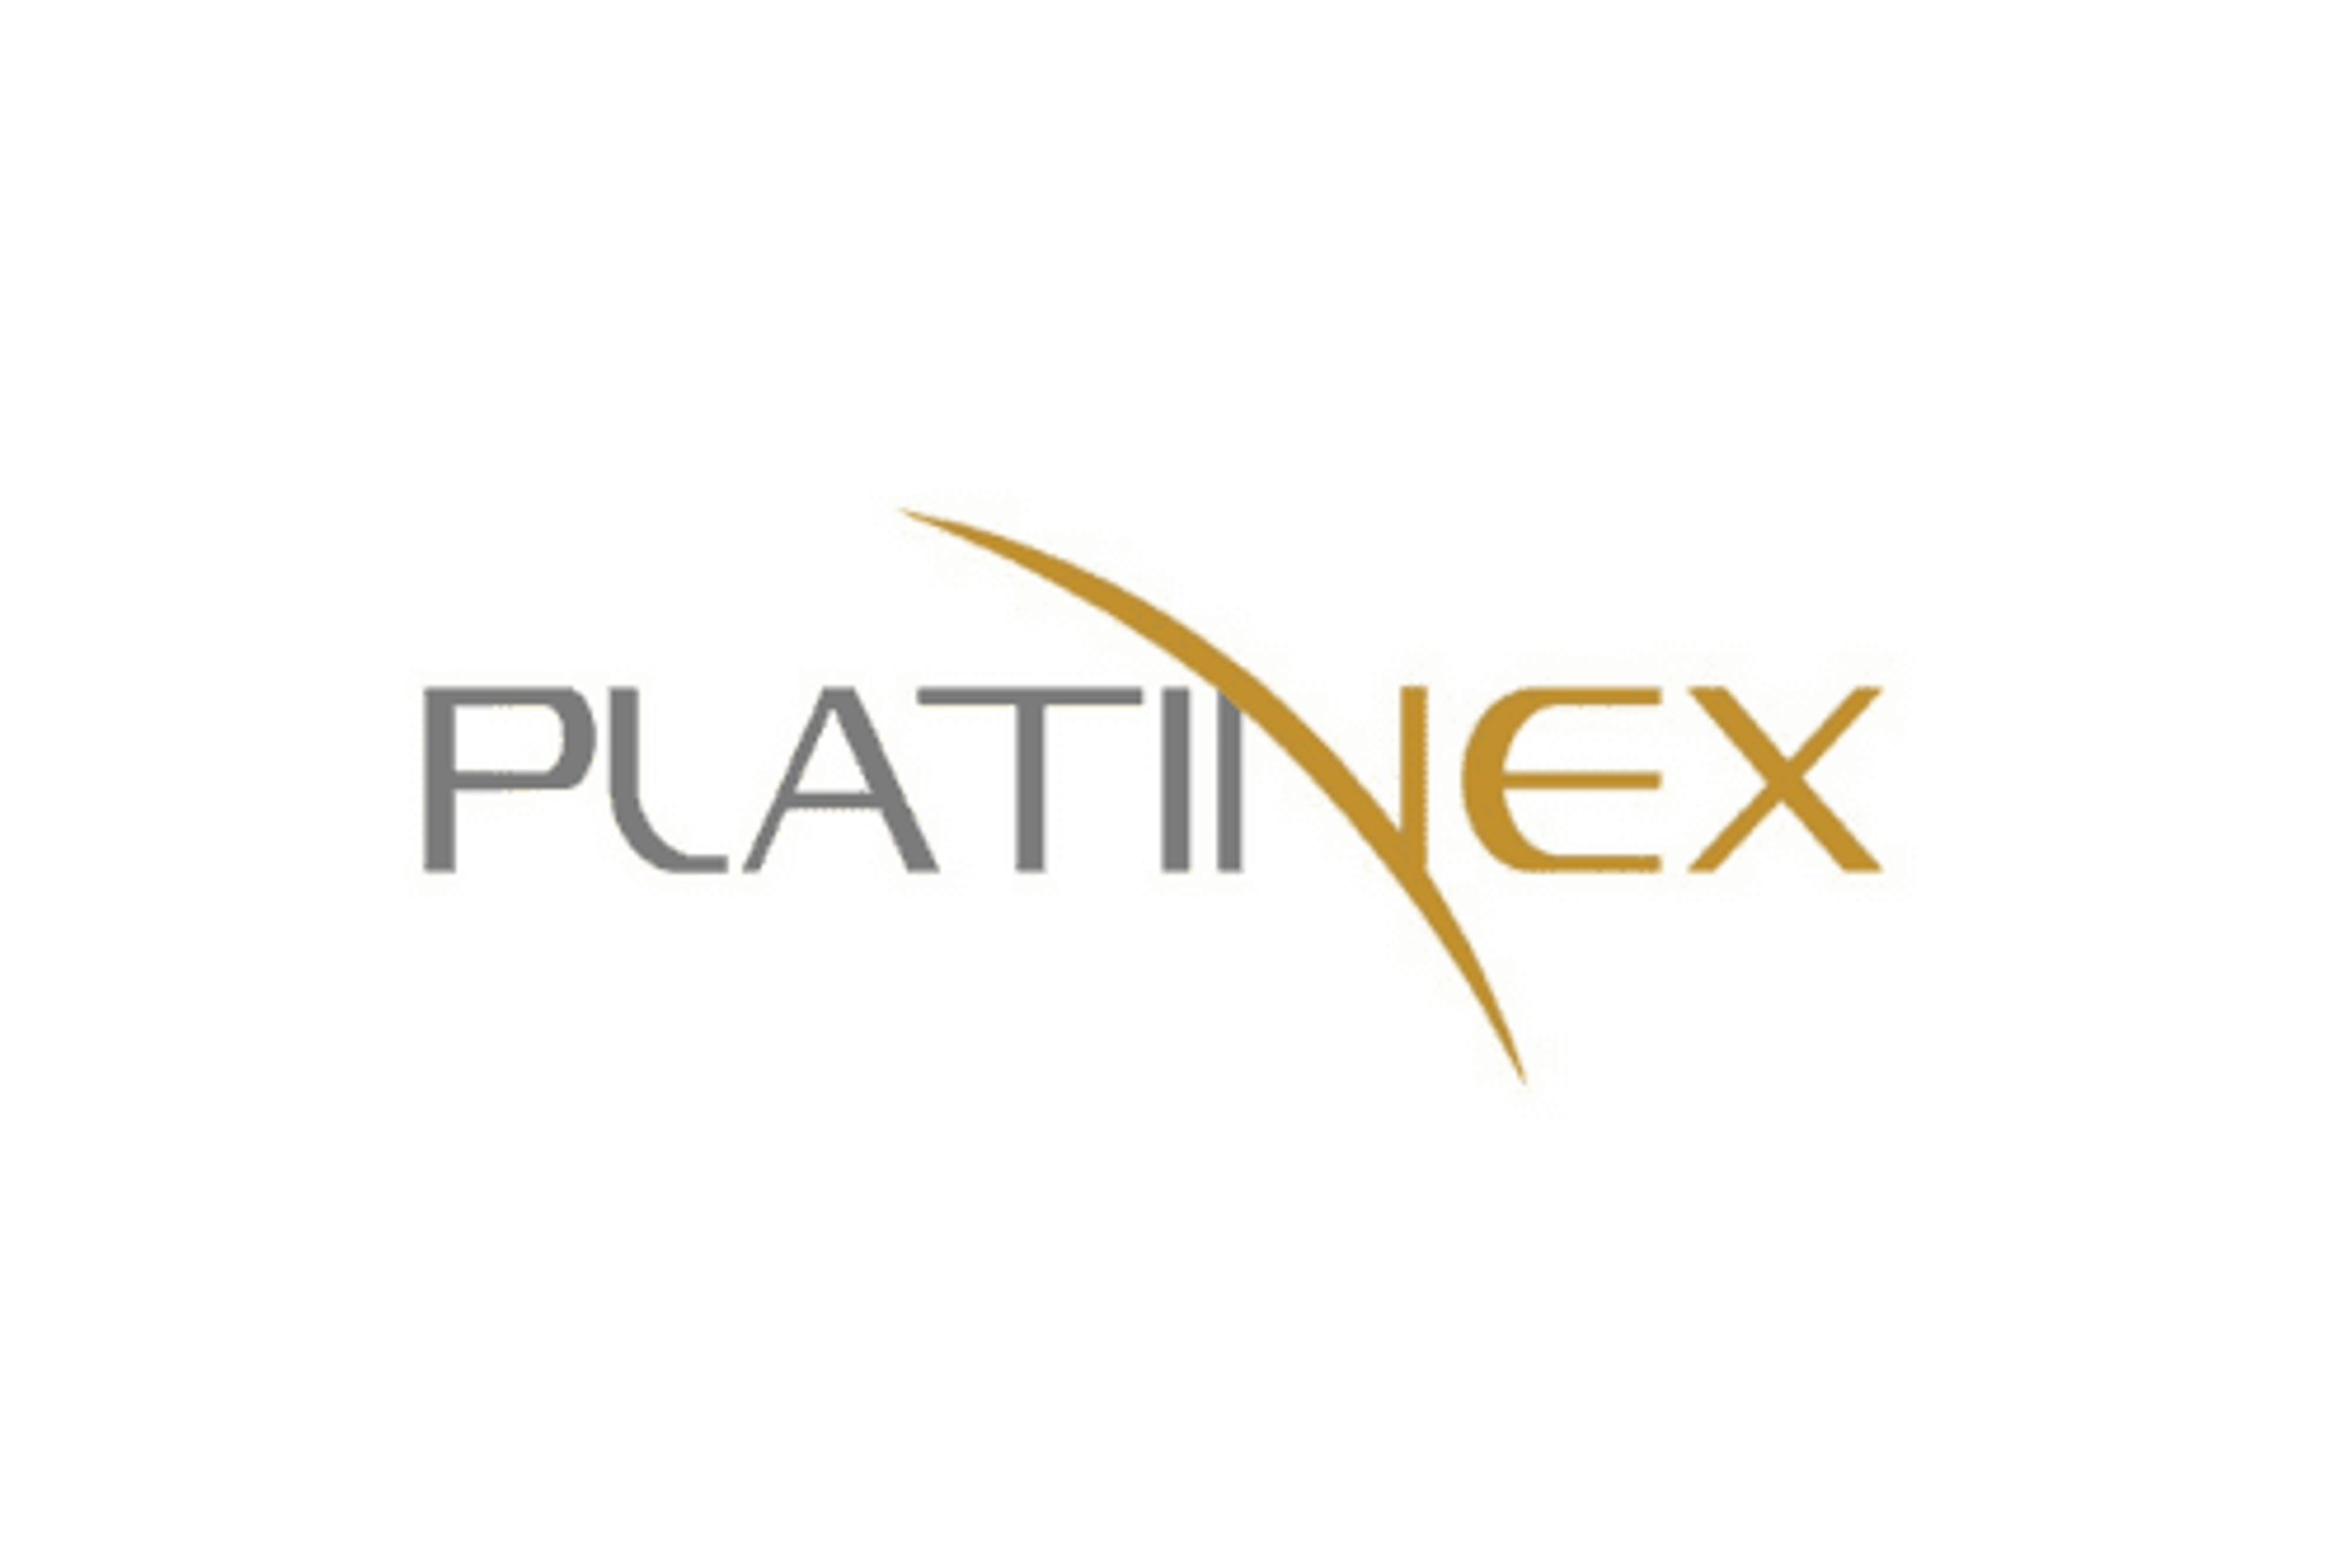 Platinex Announces Acquisition of Titanium-Vanadium Claims Adjacent to W2 Cu-Ni-PGE Project and Receipt of Government Grant for Shining Tree Gold Project